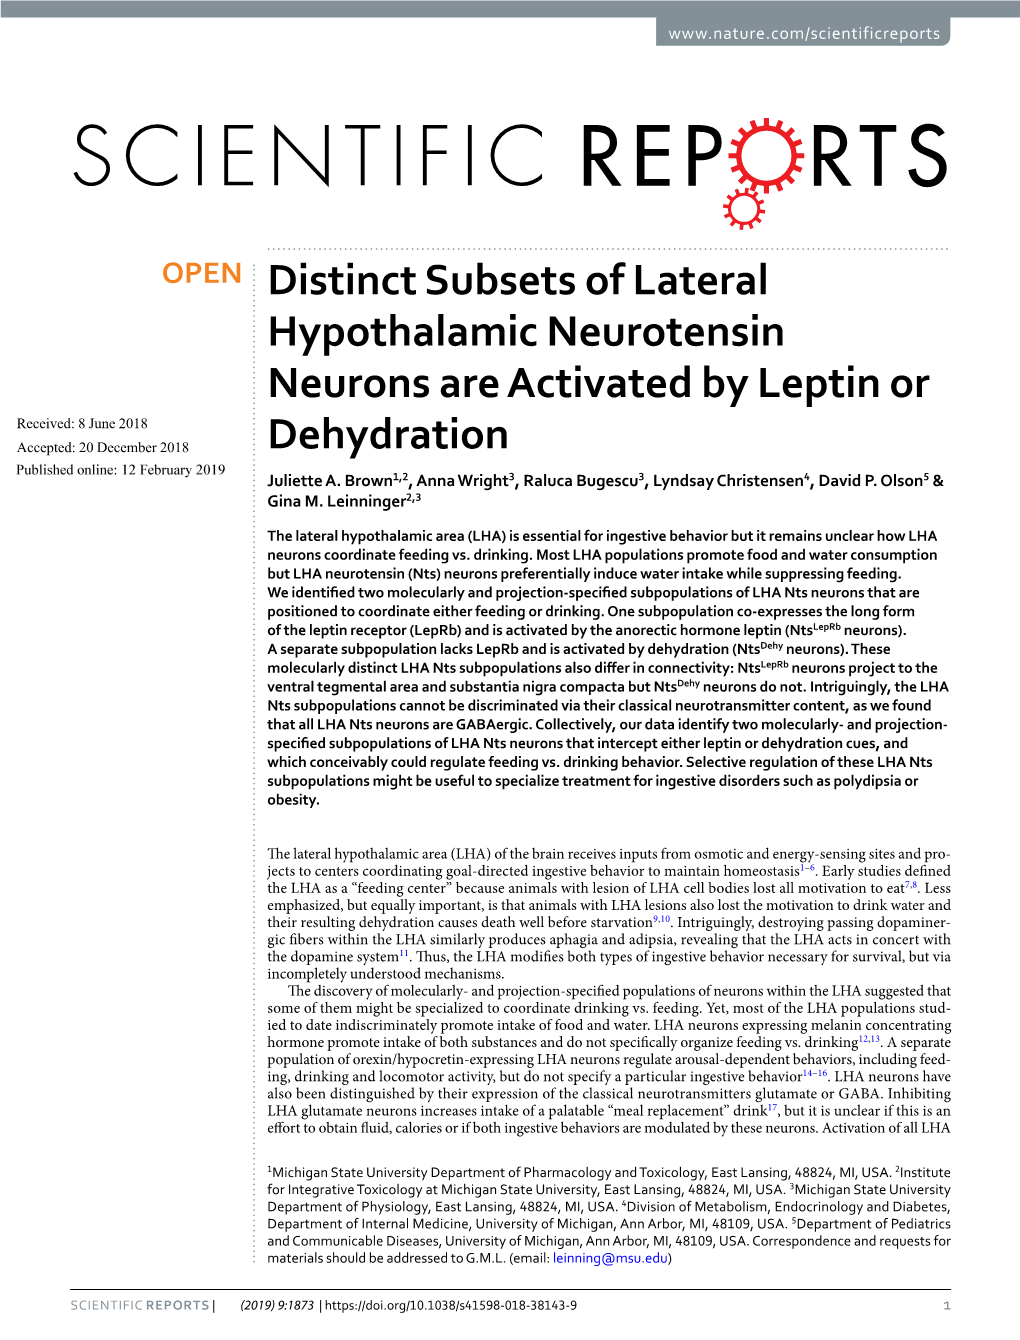 Distinct Subsets of Lateral Hypothalamic Neurotensin Neurons Are Activated by Leptin Or Dehydration